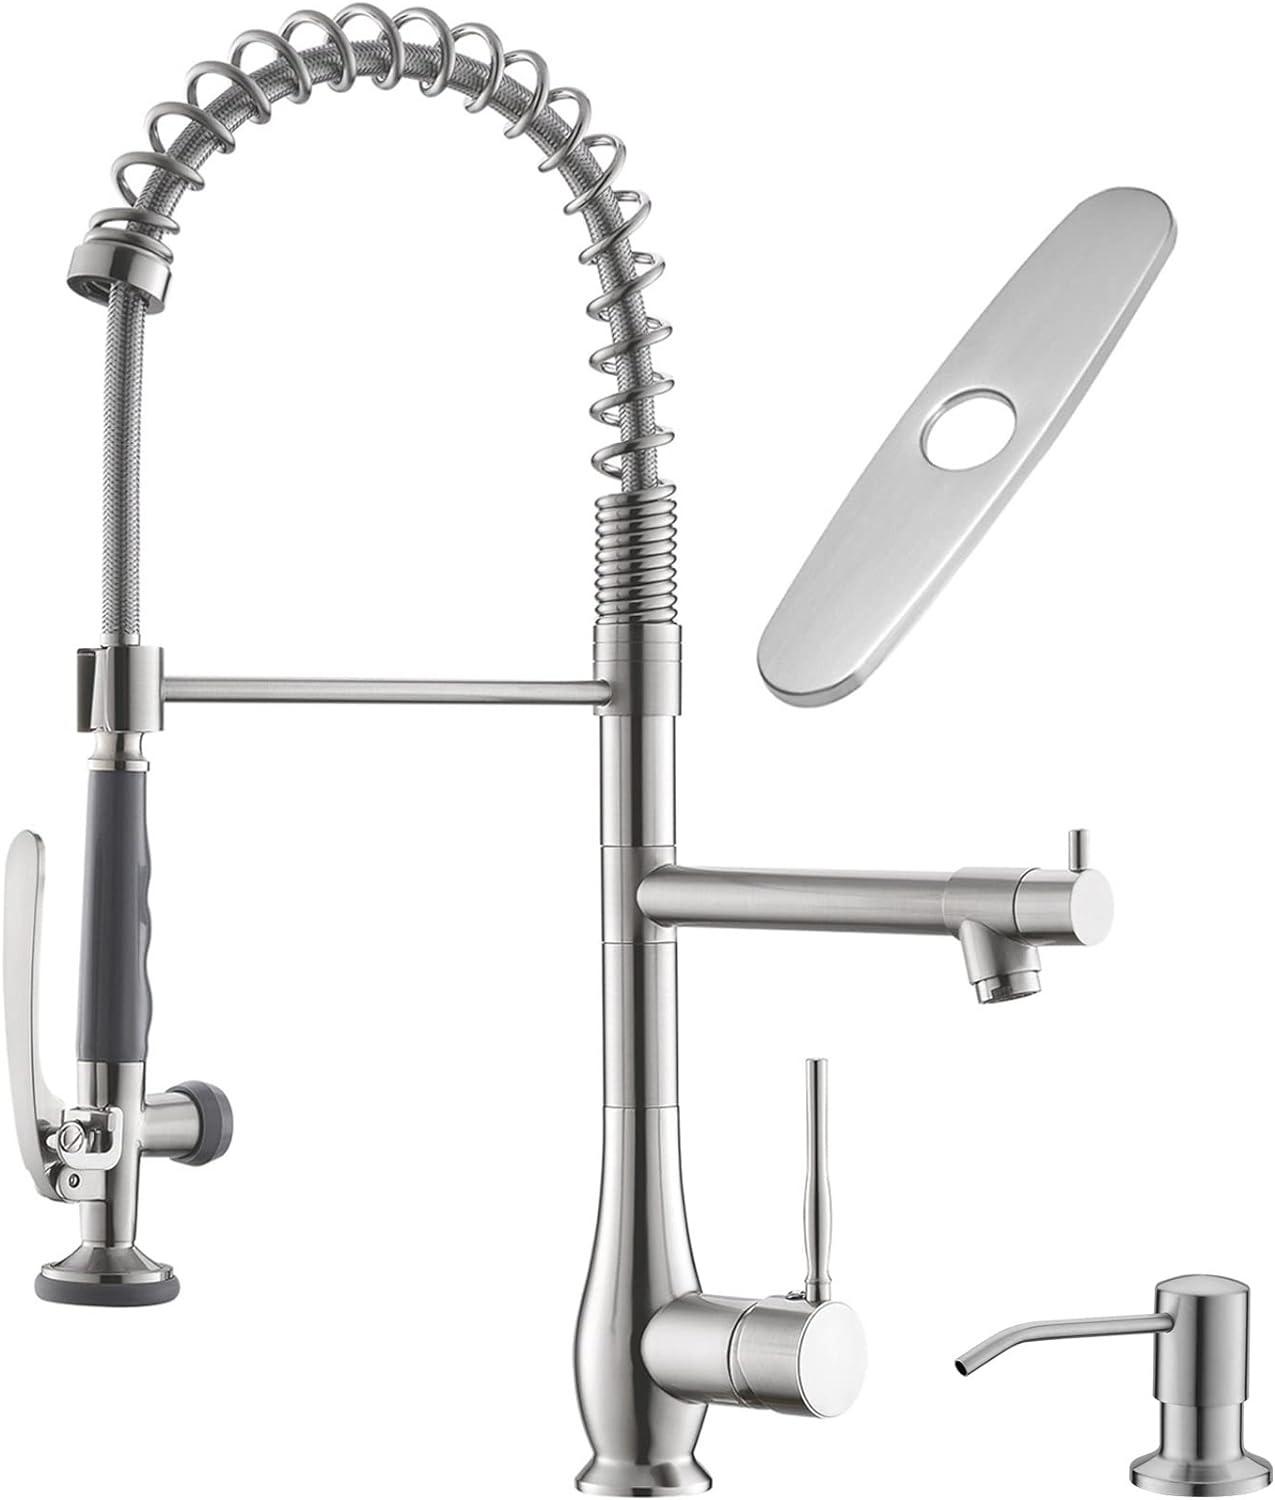 GIMILI Commercial Kitchen Faucet with Pull Down Sprayer, Double Headed Single Handle High Pressure Kitchen Faucet with Soap Dispenser Brushed Nickel